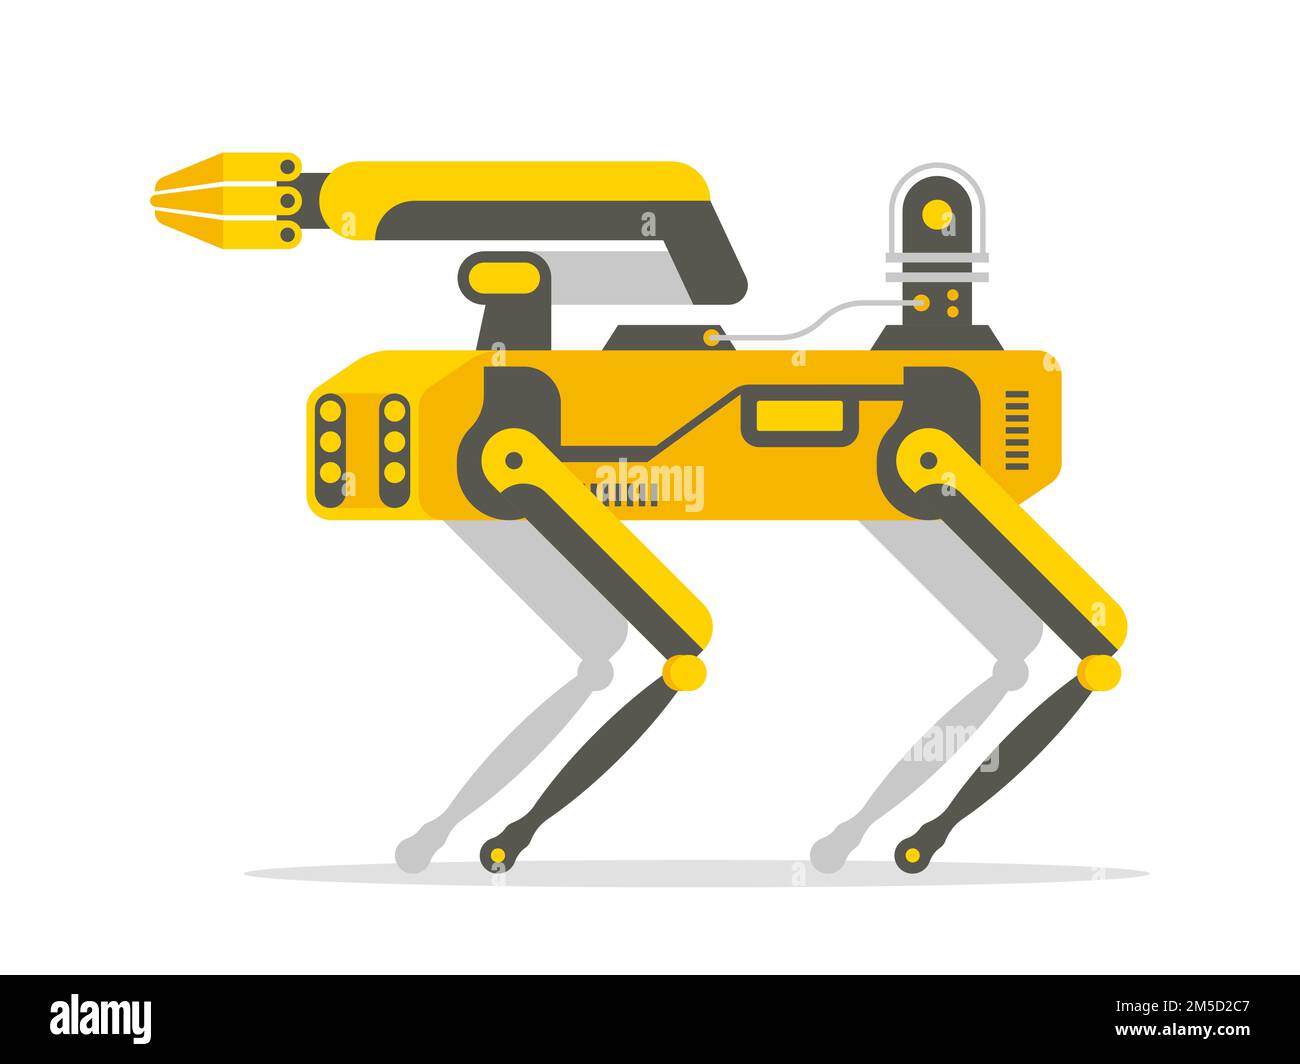 The mechanical robot dog with manipulator, sensing camera and battery. Industrial sensing and remote operation needs. Innovation in high technology. V Stock Vector